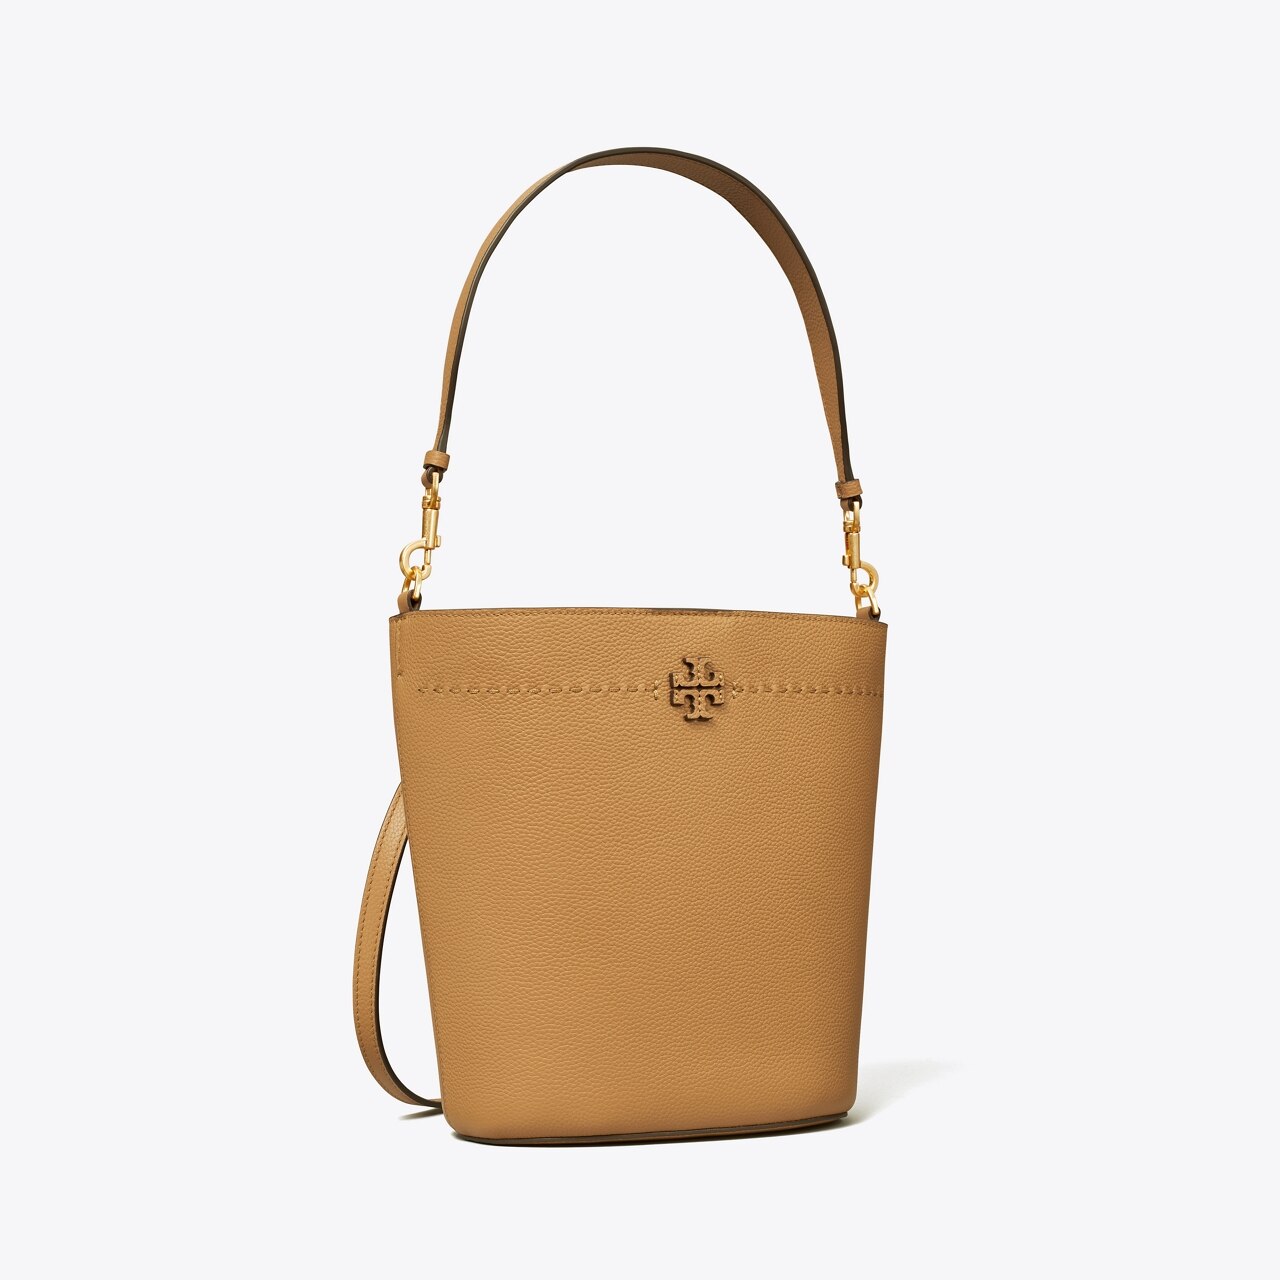 NEW Tory Burch Silver Maple McGraw Small Bucket Bag $348